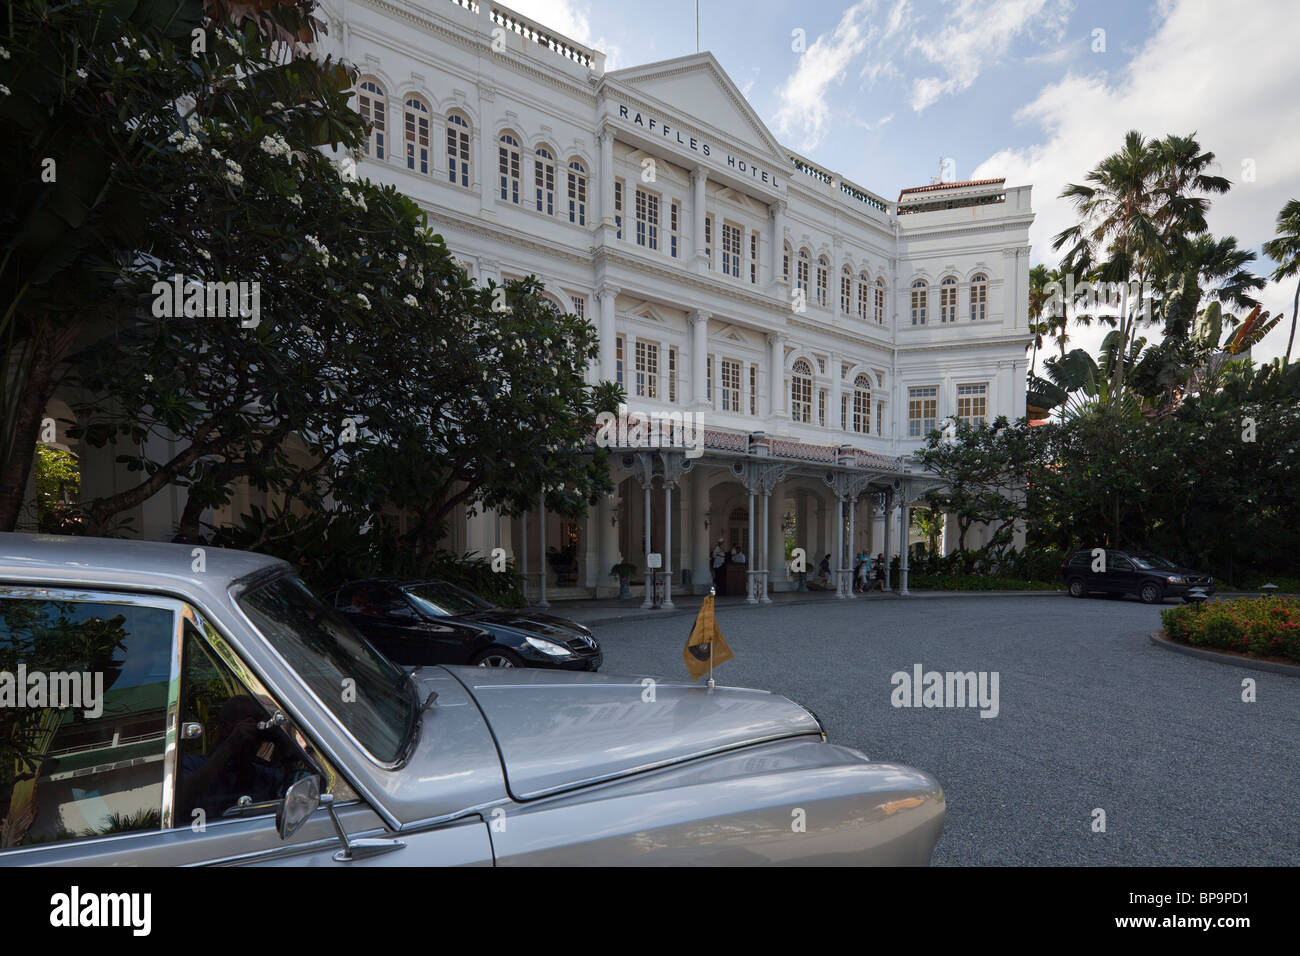 Daimler limousine parked in front of Raffles Hotel, Singapore Stock Photo